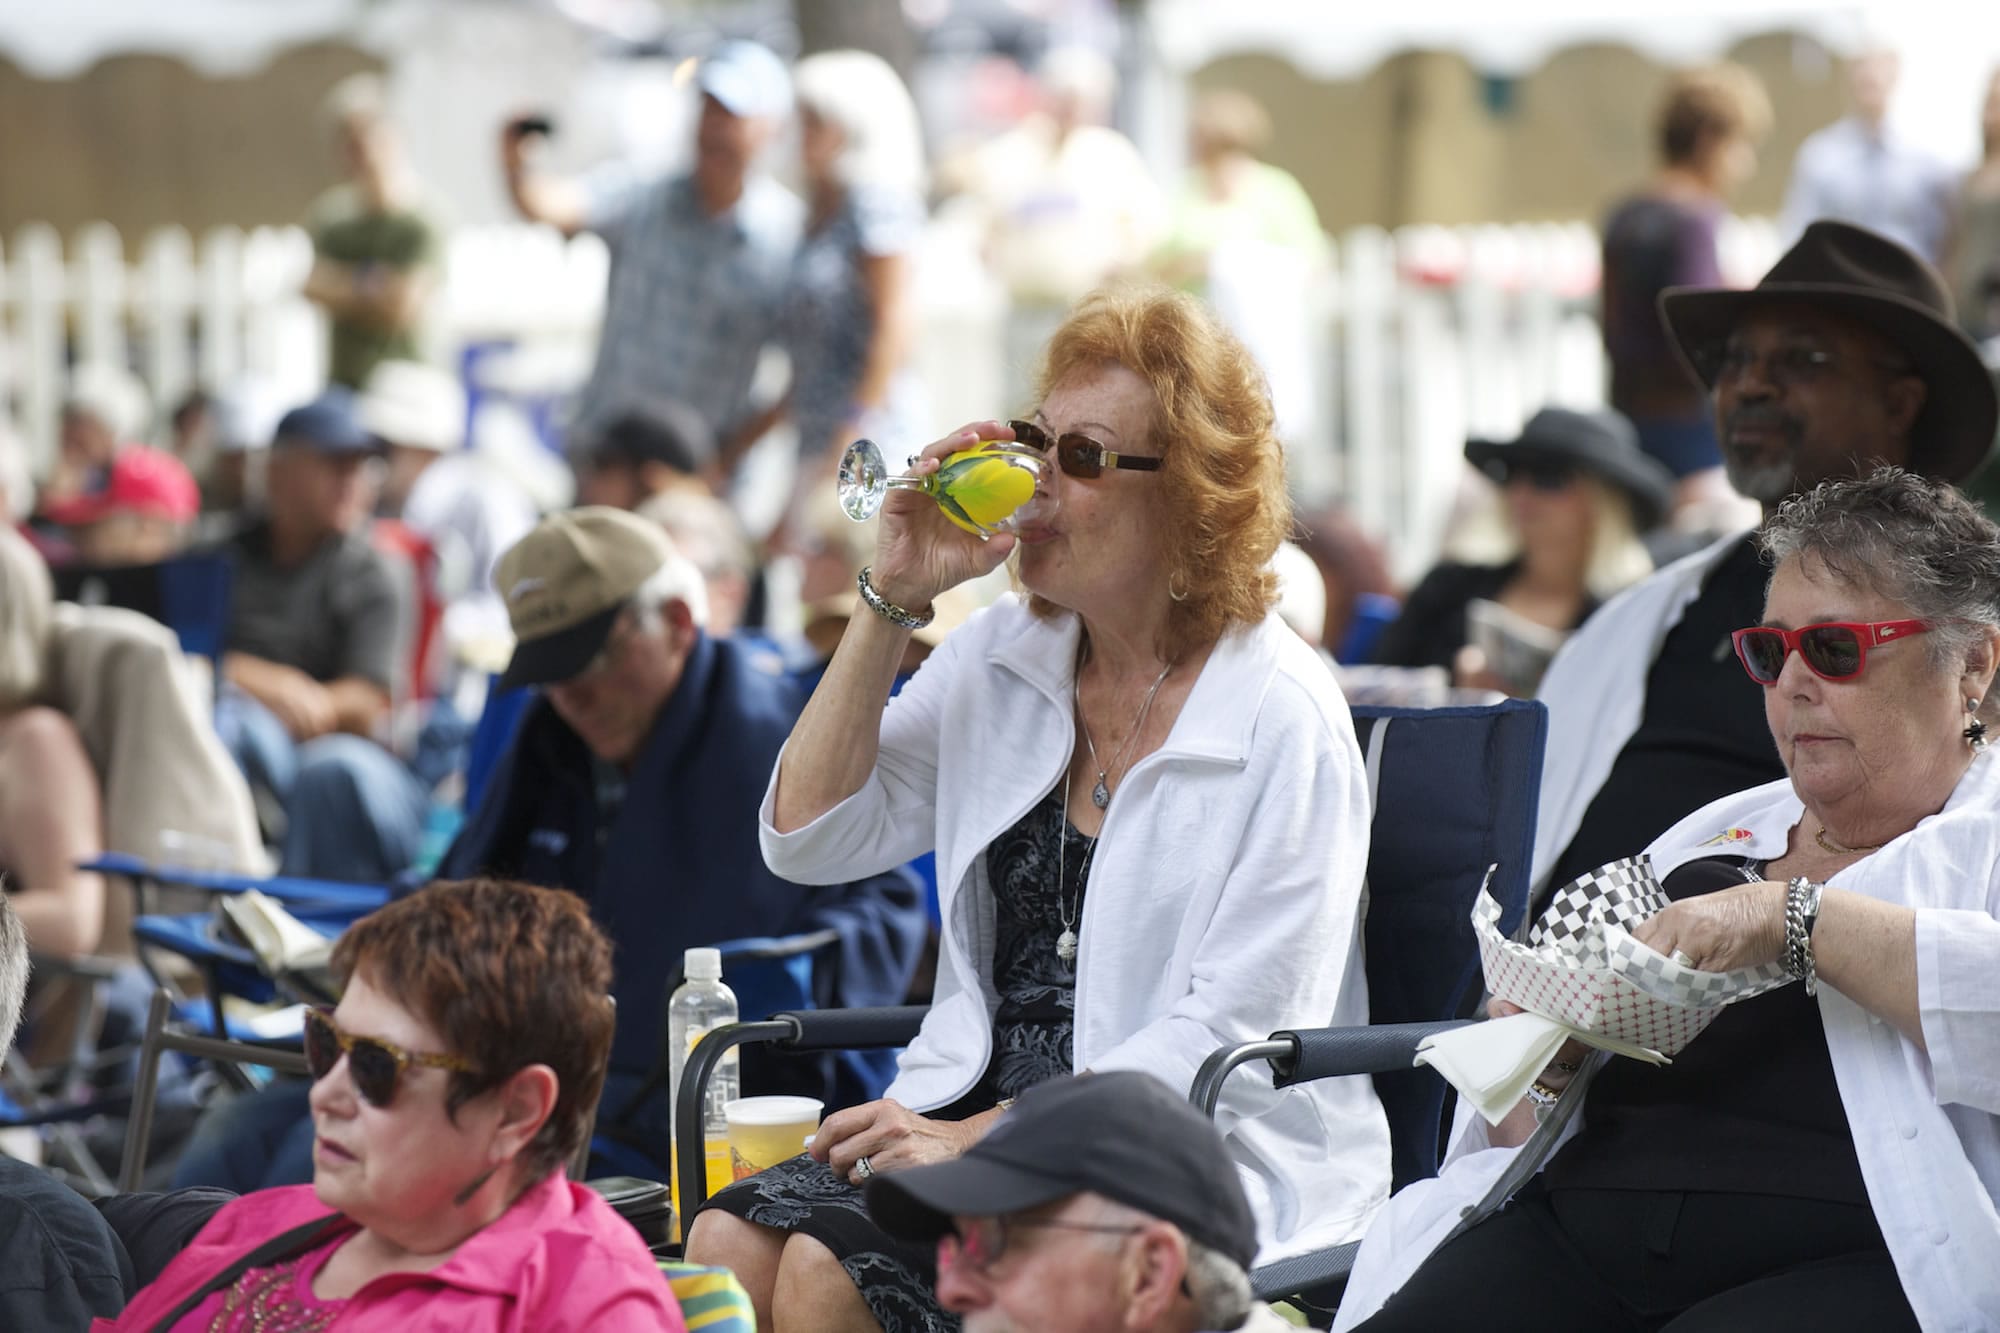 Gail Pritchett enjoys a drink Sunday at the 2013 Vancouver Wine and Jazz Festival in Esther Short Park.